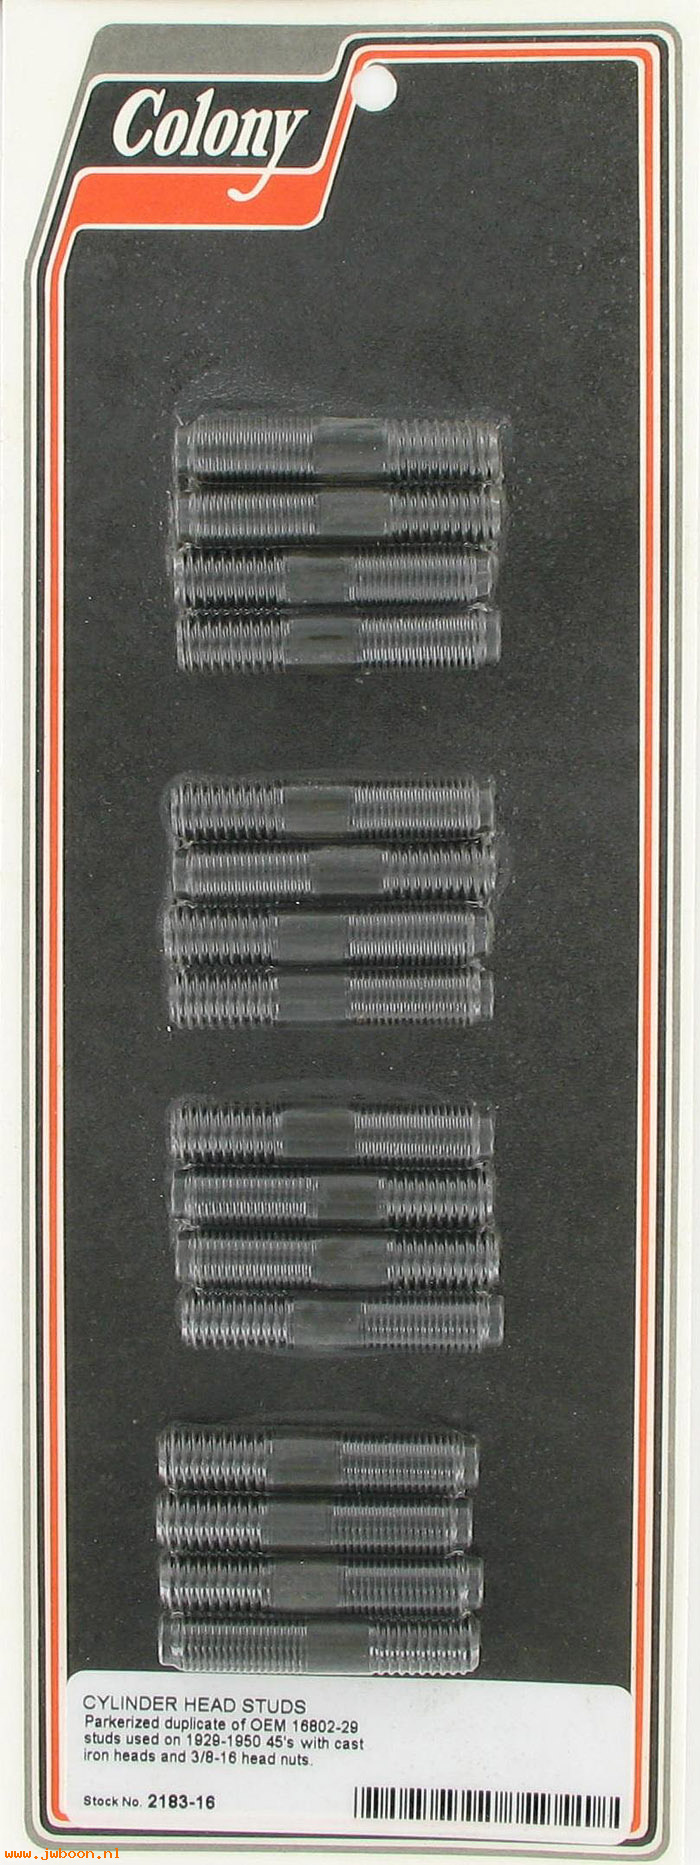 C 2183-16 (16802-29 / 14-29): Cylinder head stud kit - 750cc with iron heads '29-'50, in stock